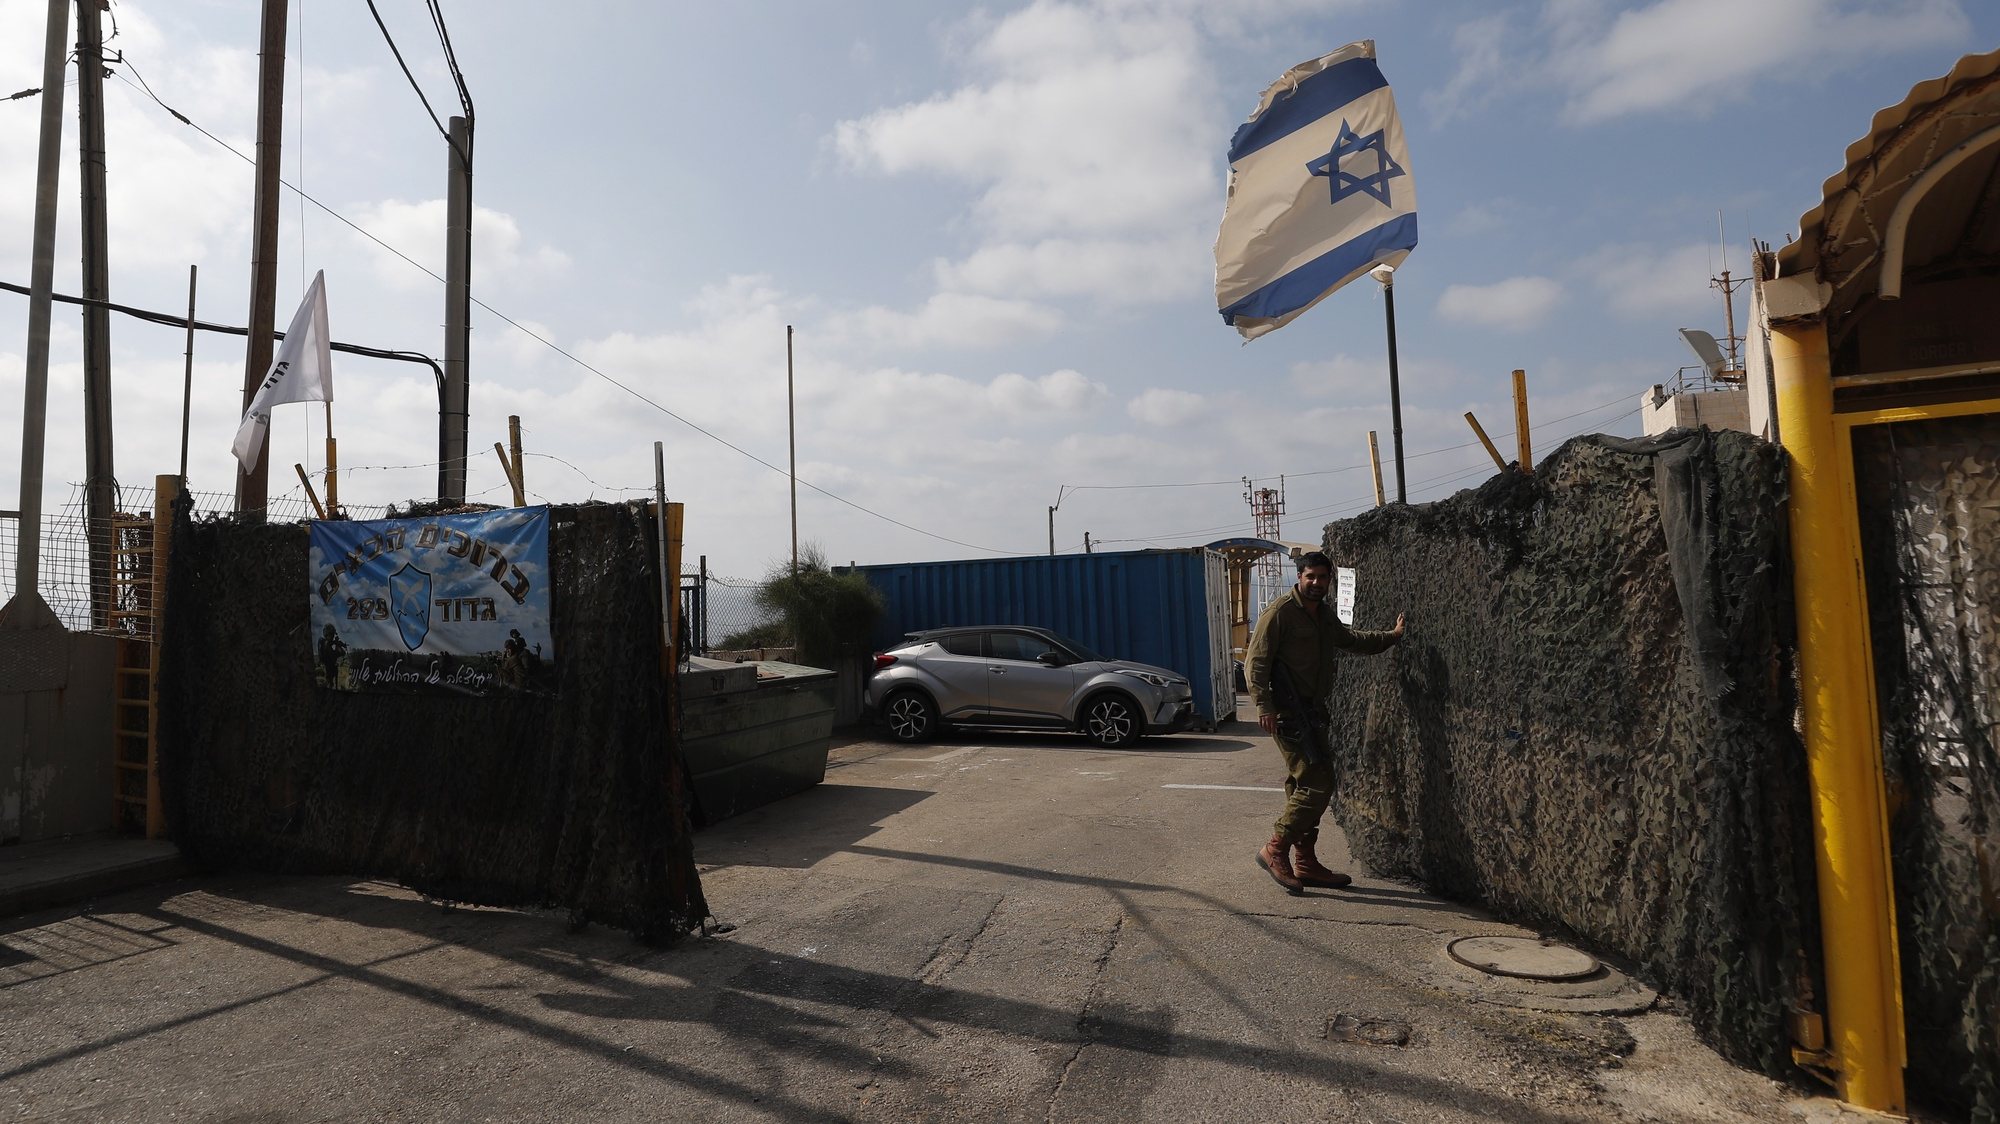 epa09999190 An Israeli soldier opens a gate of an Israeli army base next to Rosh Hanikra, near Haifa at the Israel-Lebanon border, 06 June 2022. Lebanese President Michel Aoun stressed that &#039;any Israeli exploration, excavation or extraction activities carried out in the disputed areas constitute an act of aggression&#039; after natural gas storage and production ship Energean entered into the disputed area in the southern maritime borders. Aoun also asked the Lebanese army leadership to provide him with accurate and official data in this regard.  EPA/ATEF SAFADI